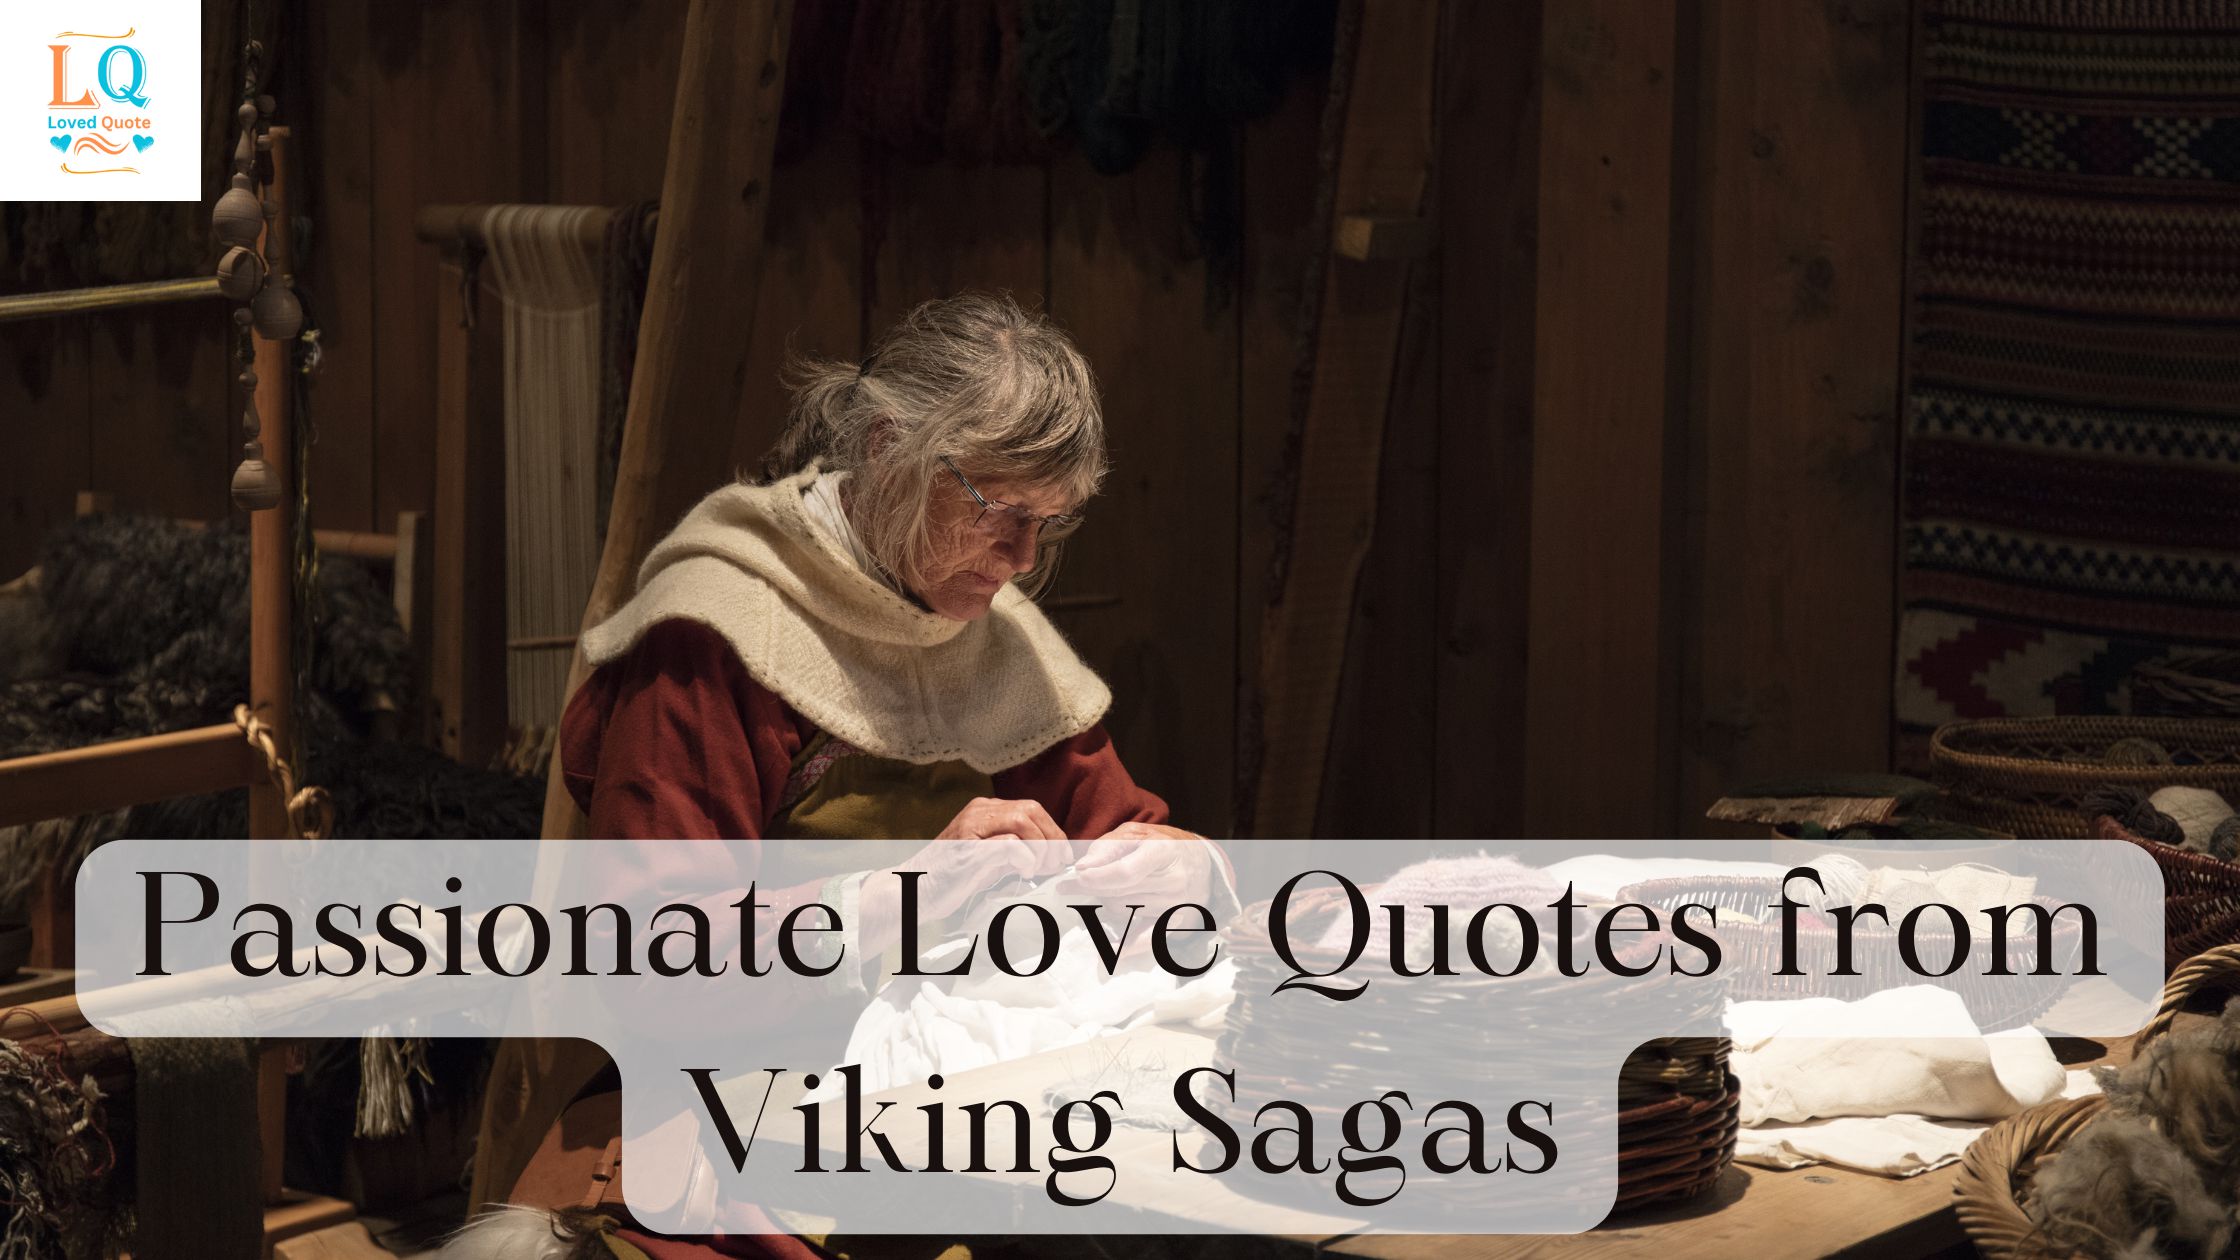 Passionate Love Quotes from Viking Sagas